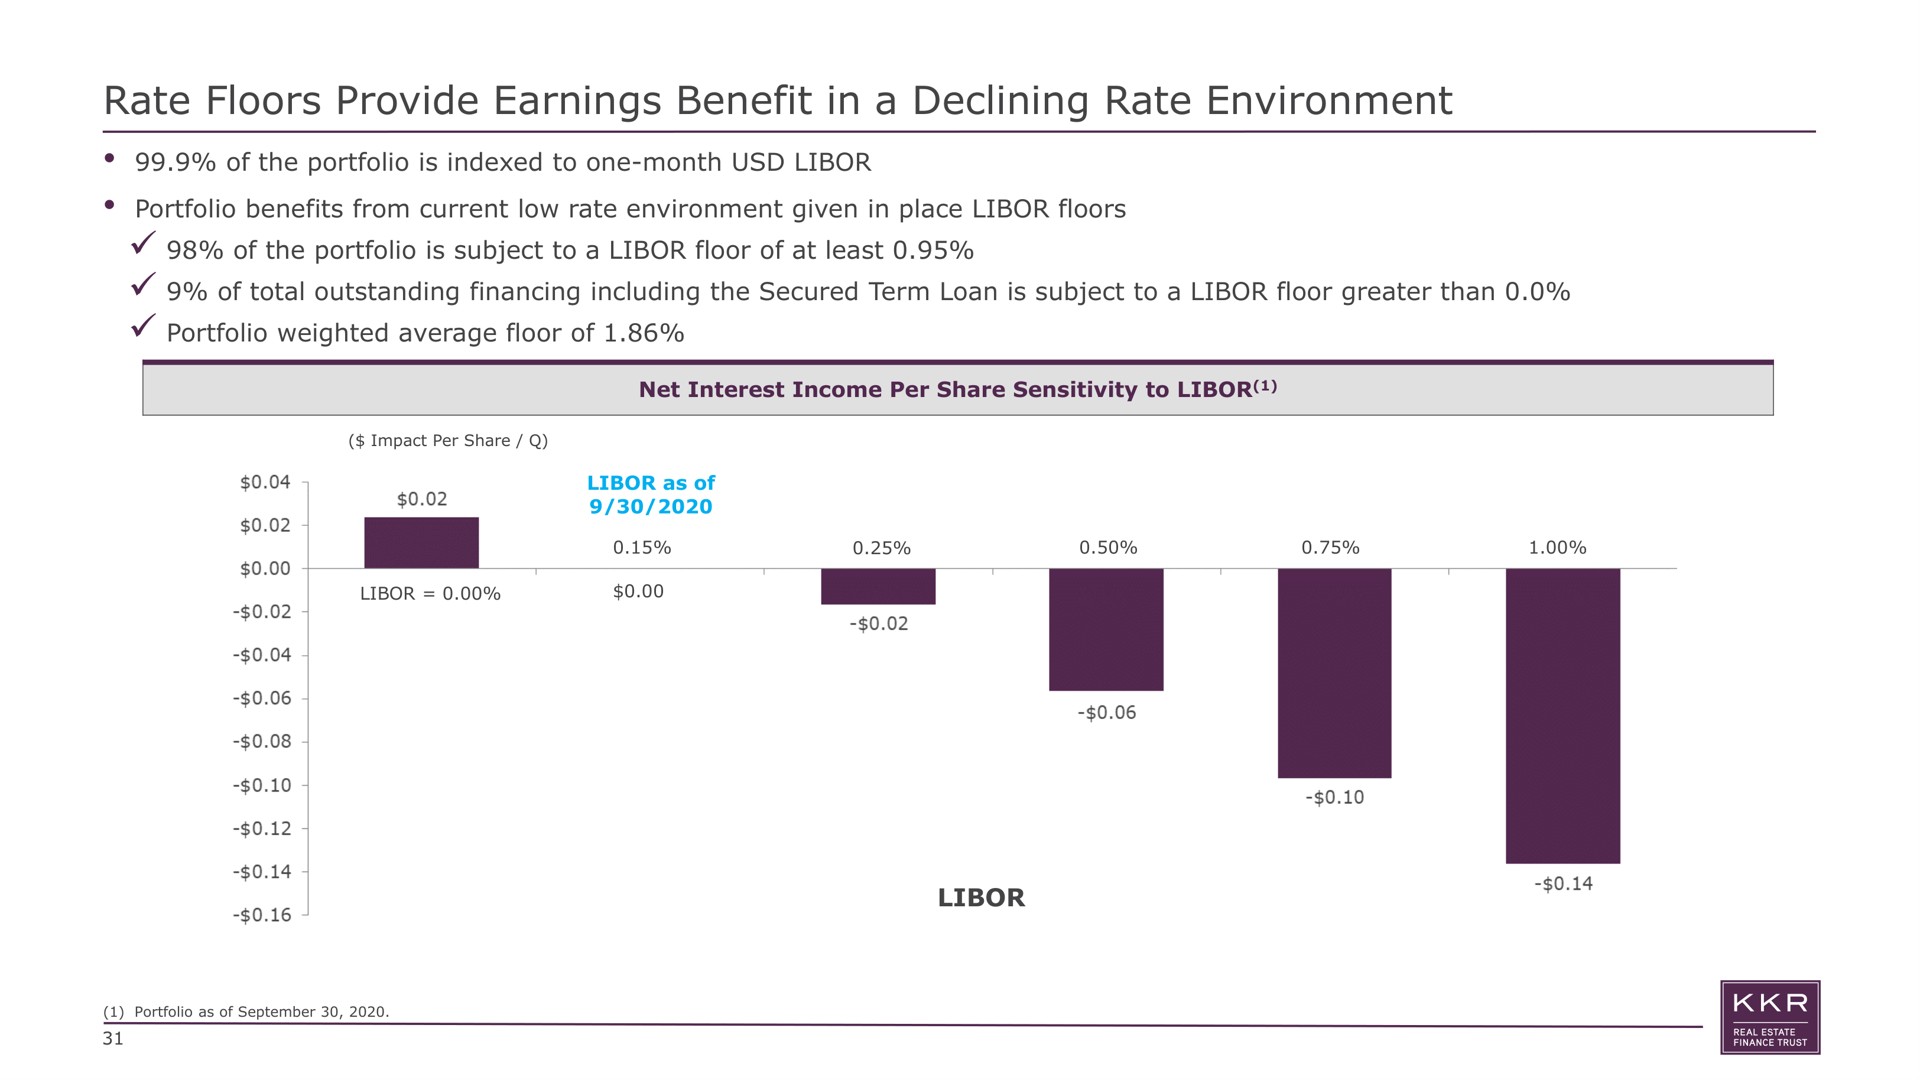 rate floors provide earnings benefit in a declining rate environment of the portfolio is indexed to one month portfolio benefits from current low given place of the portfolio is subject to floor of at least of total outstanding financing including the secured term loan is subject to floor greater than portfolio weighted average floor of | KKR Real Estate Finance Trust